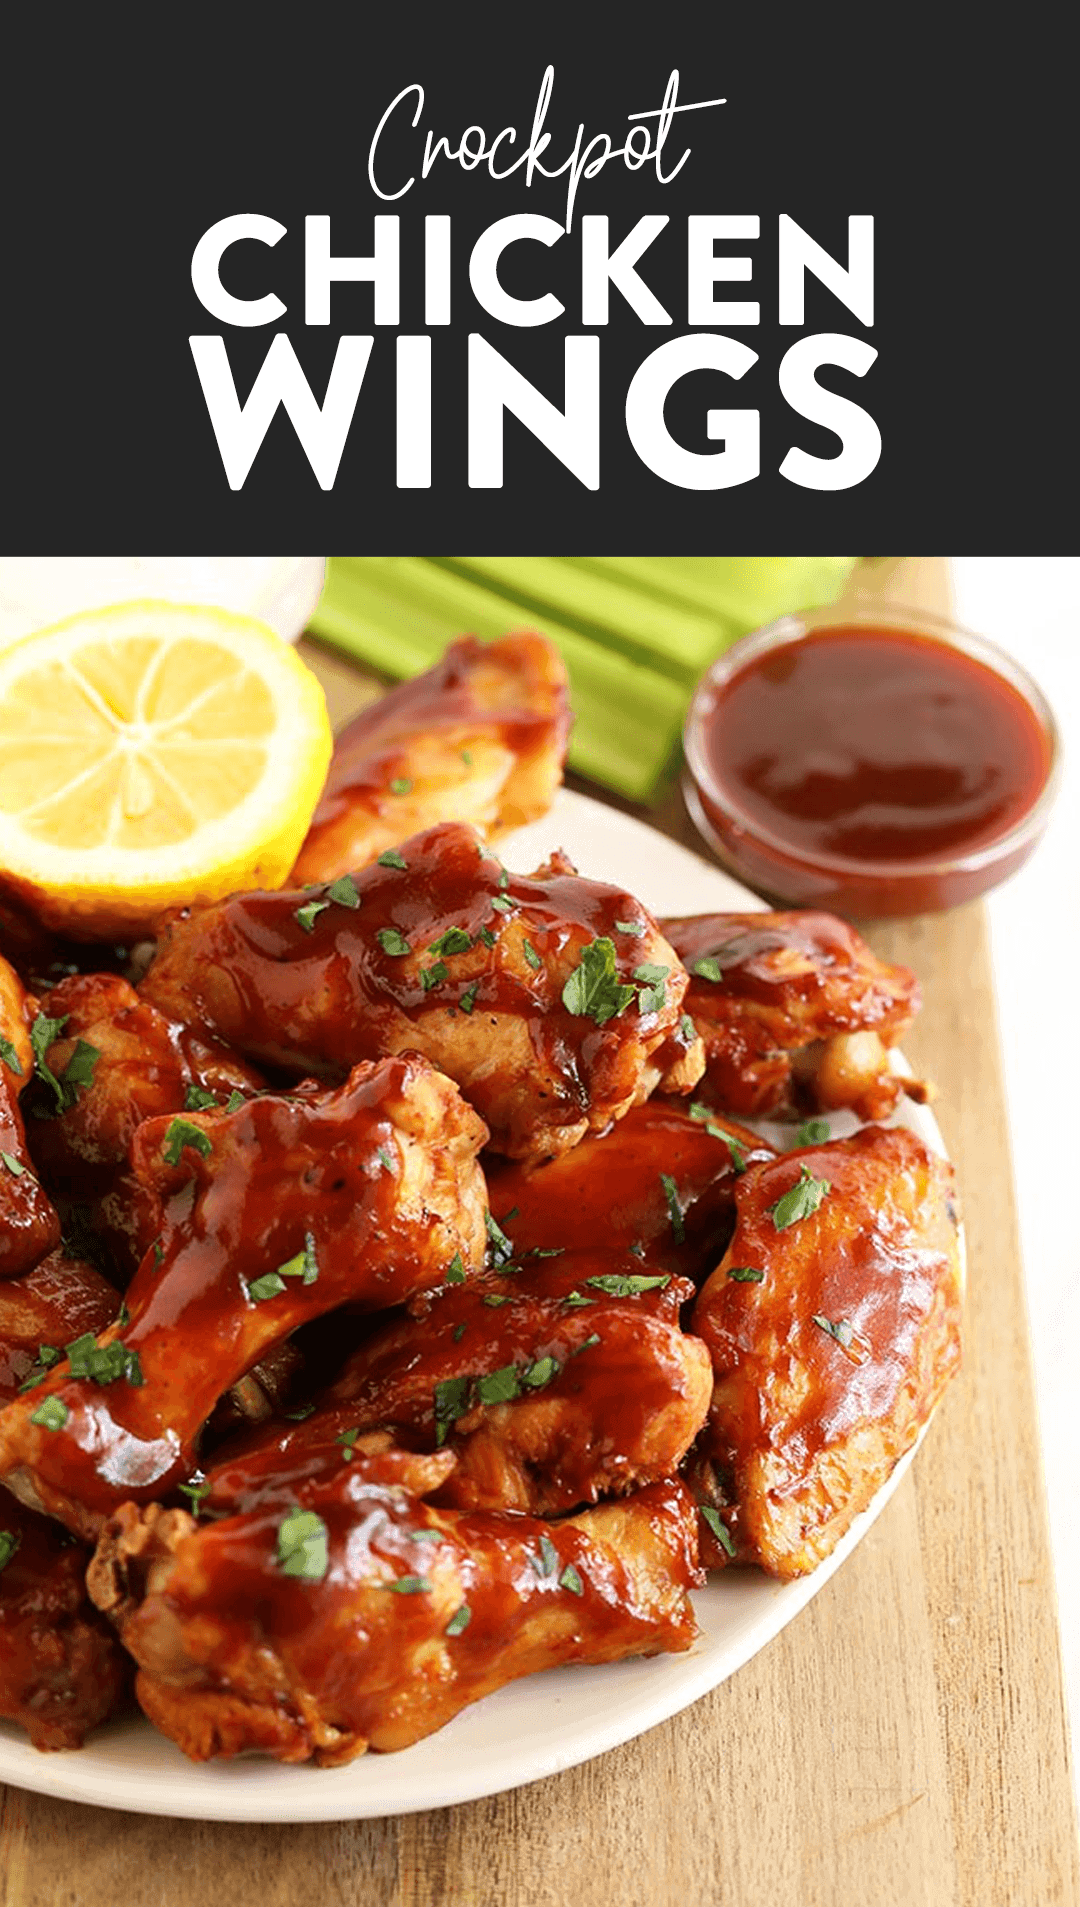 BBQ Crock Pot Chicken Wings (super easy!) - Fit Foodie Finds